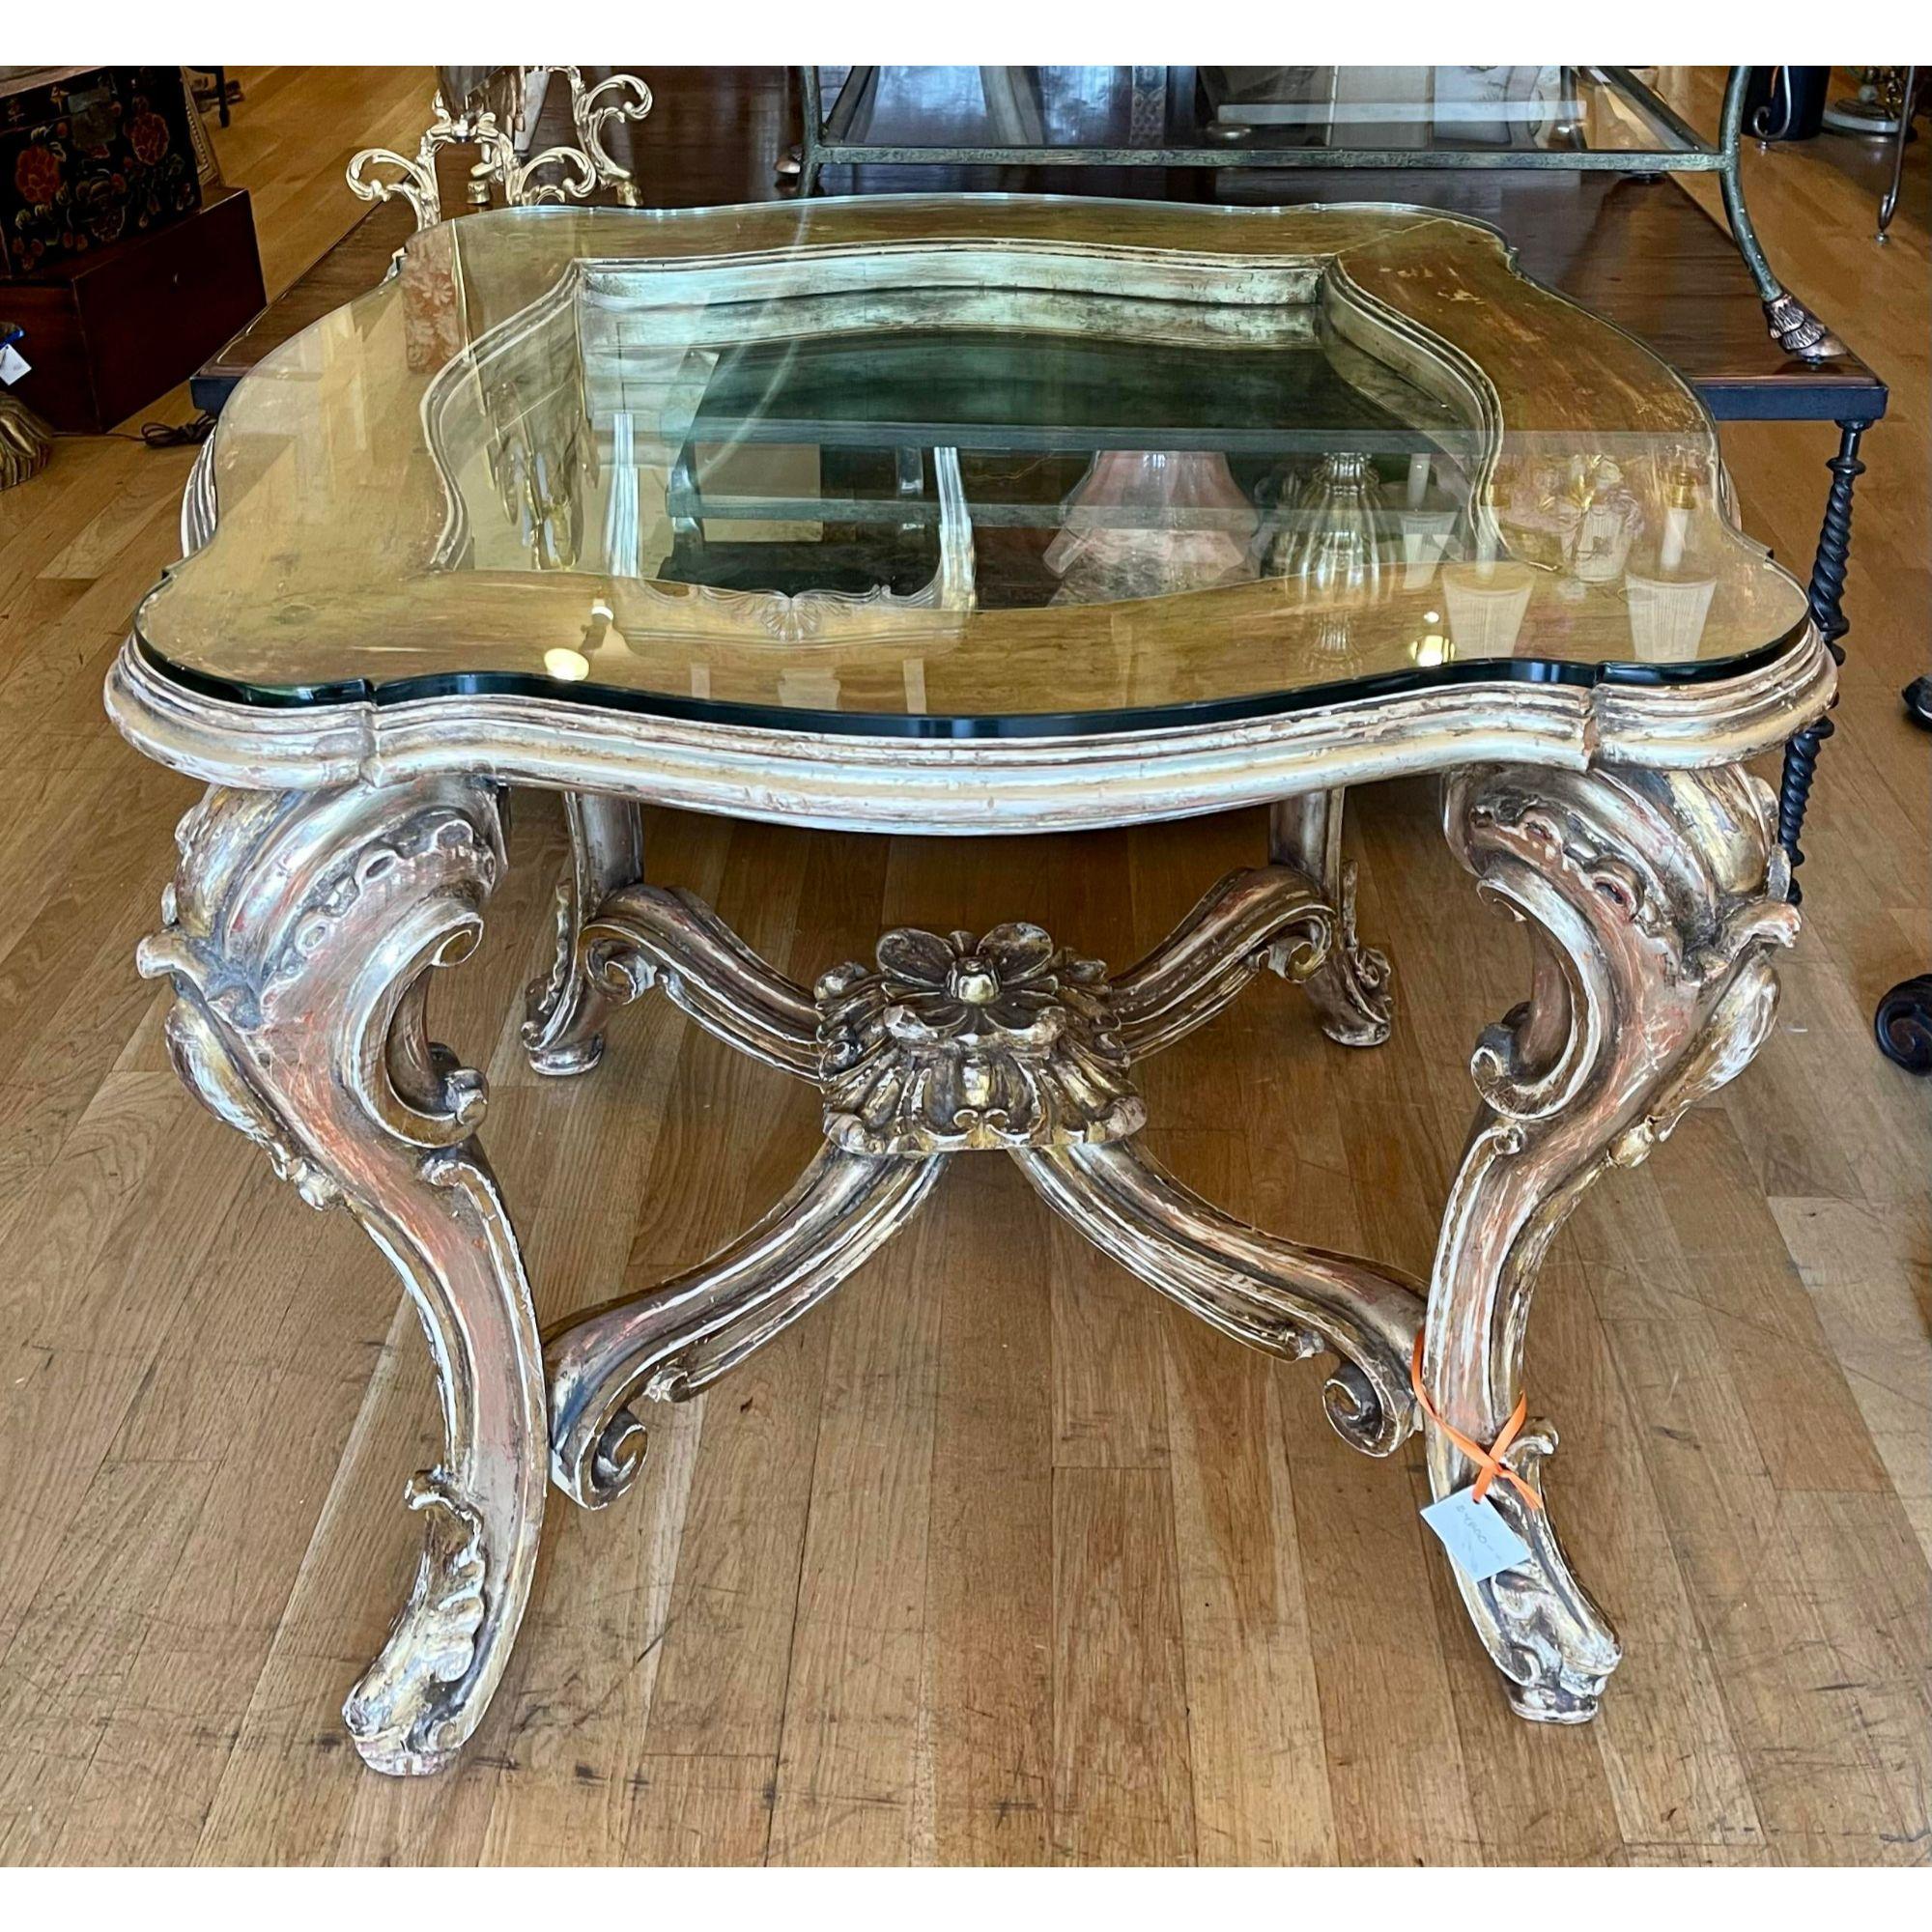 Antique 18th century style Rococo Venetian giltwood table with antiqued mirror.
Additional information:
Materials: Giltwood, mirror
Color: Gold
Period: 1920s
Place of Origin: Spain
Styles: Italian, Rococo
Table Shape: Other (unique